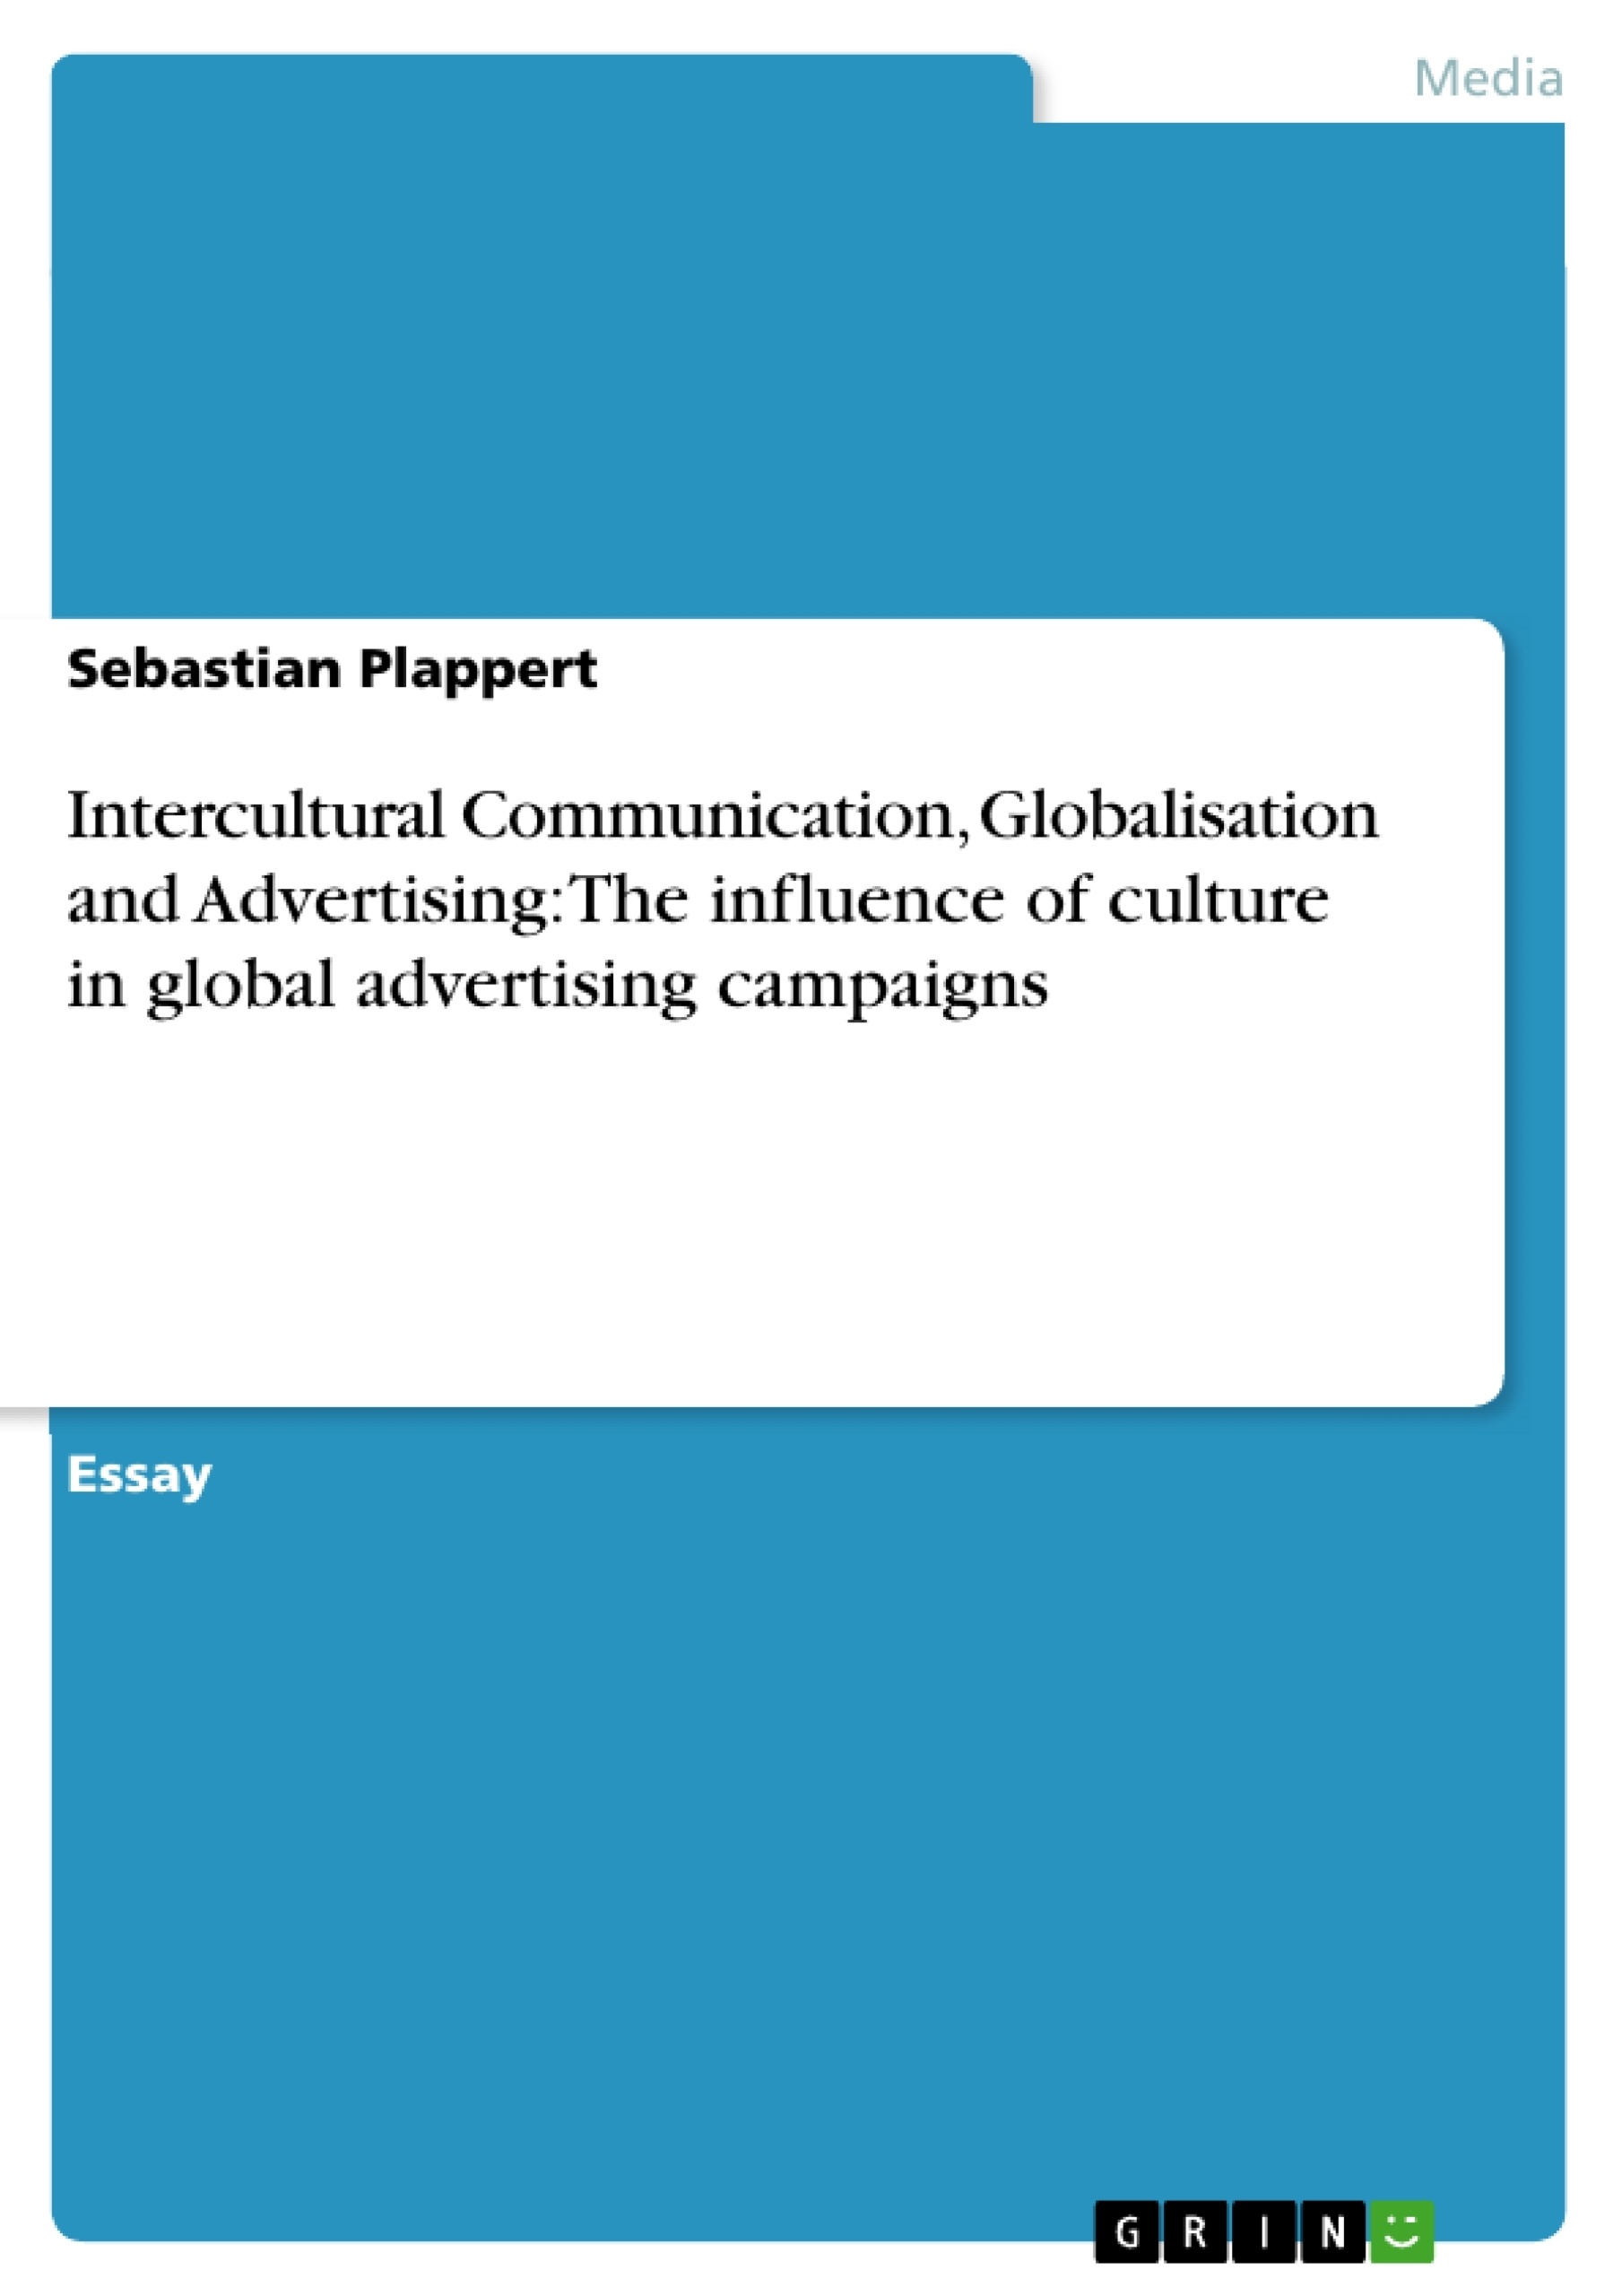 Titre: Intercultural Communication, Globalisation and Advertising: The influence of culture in global advertising campaigns